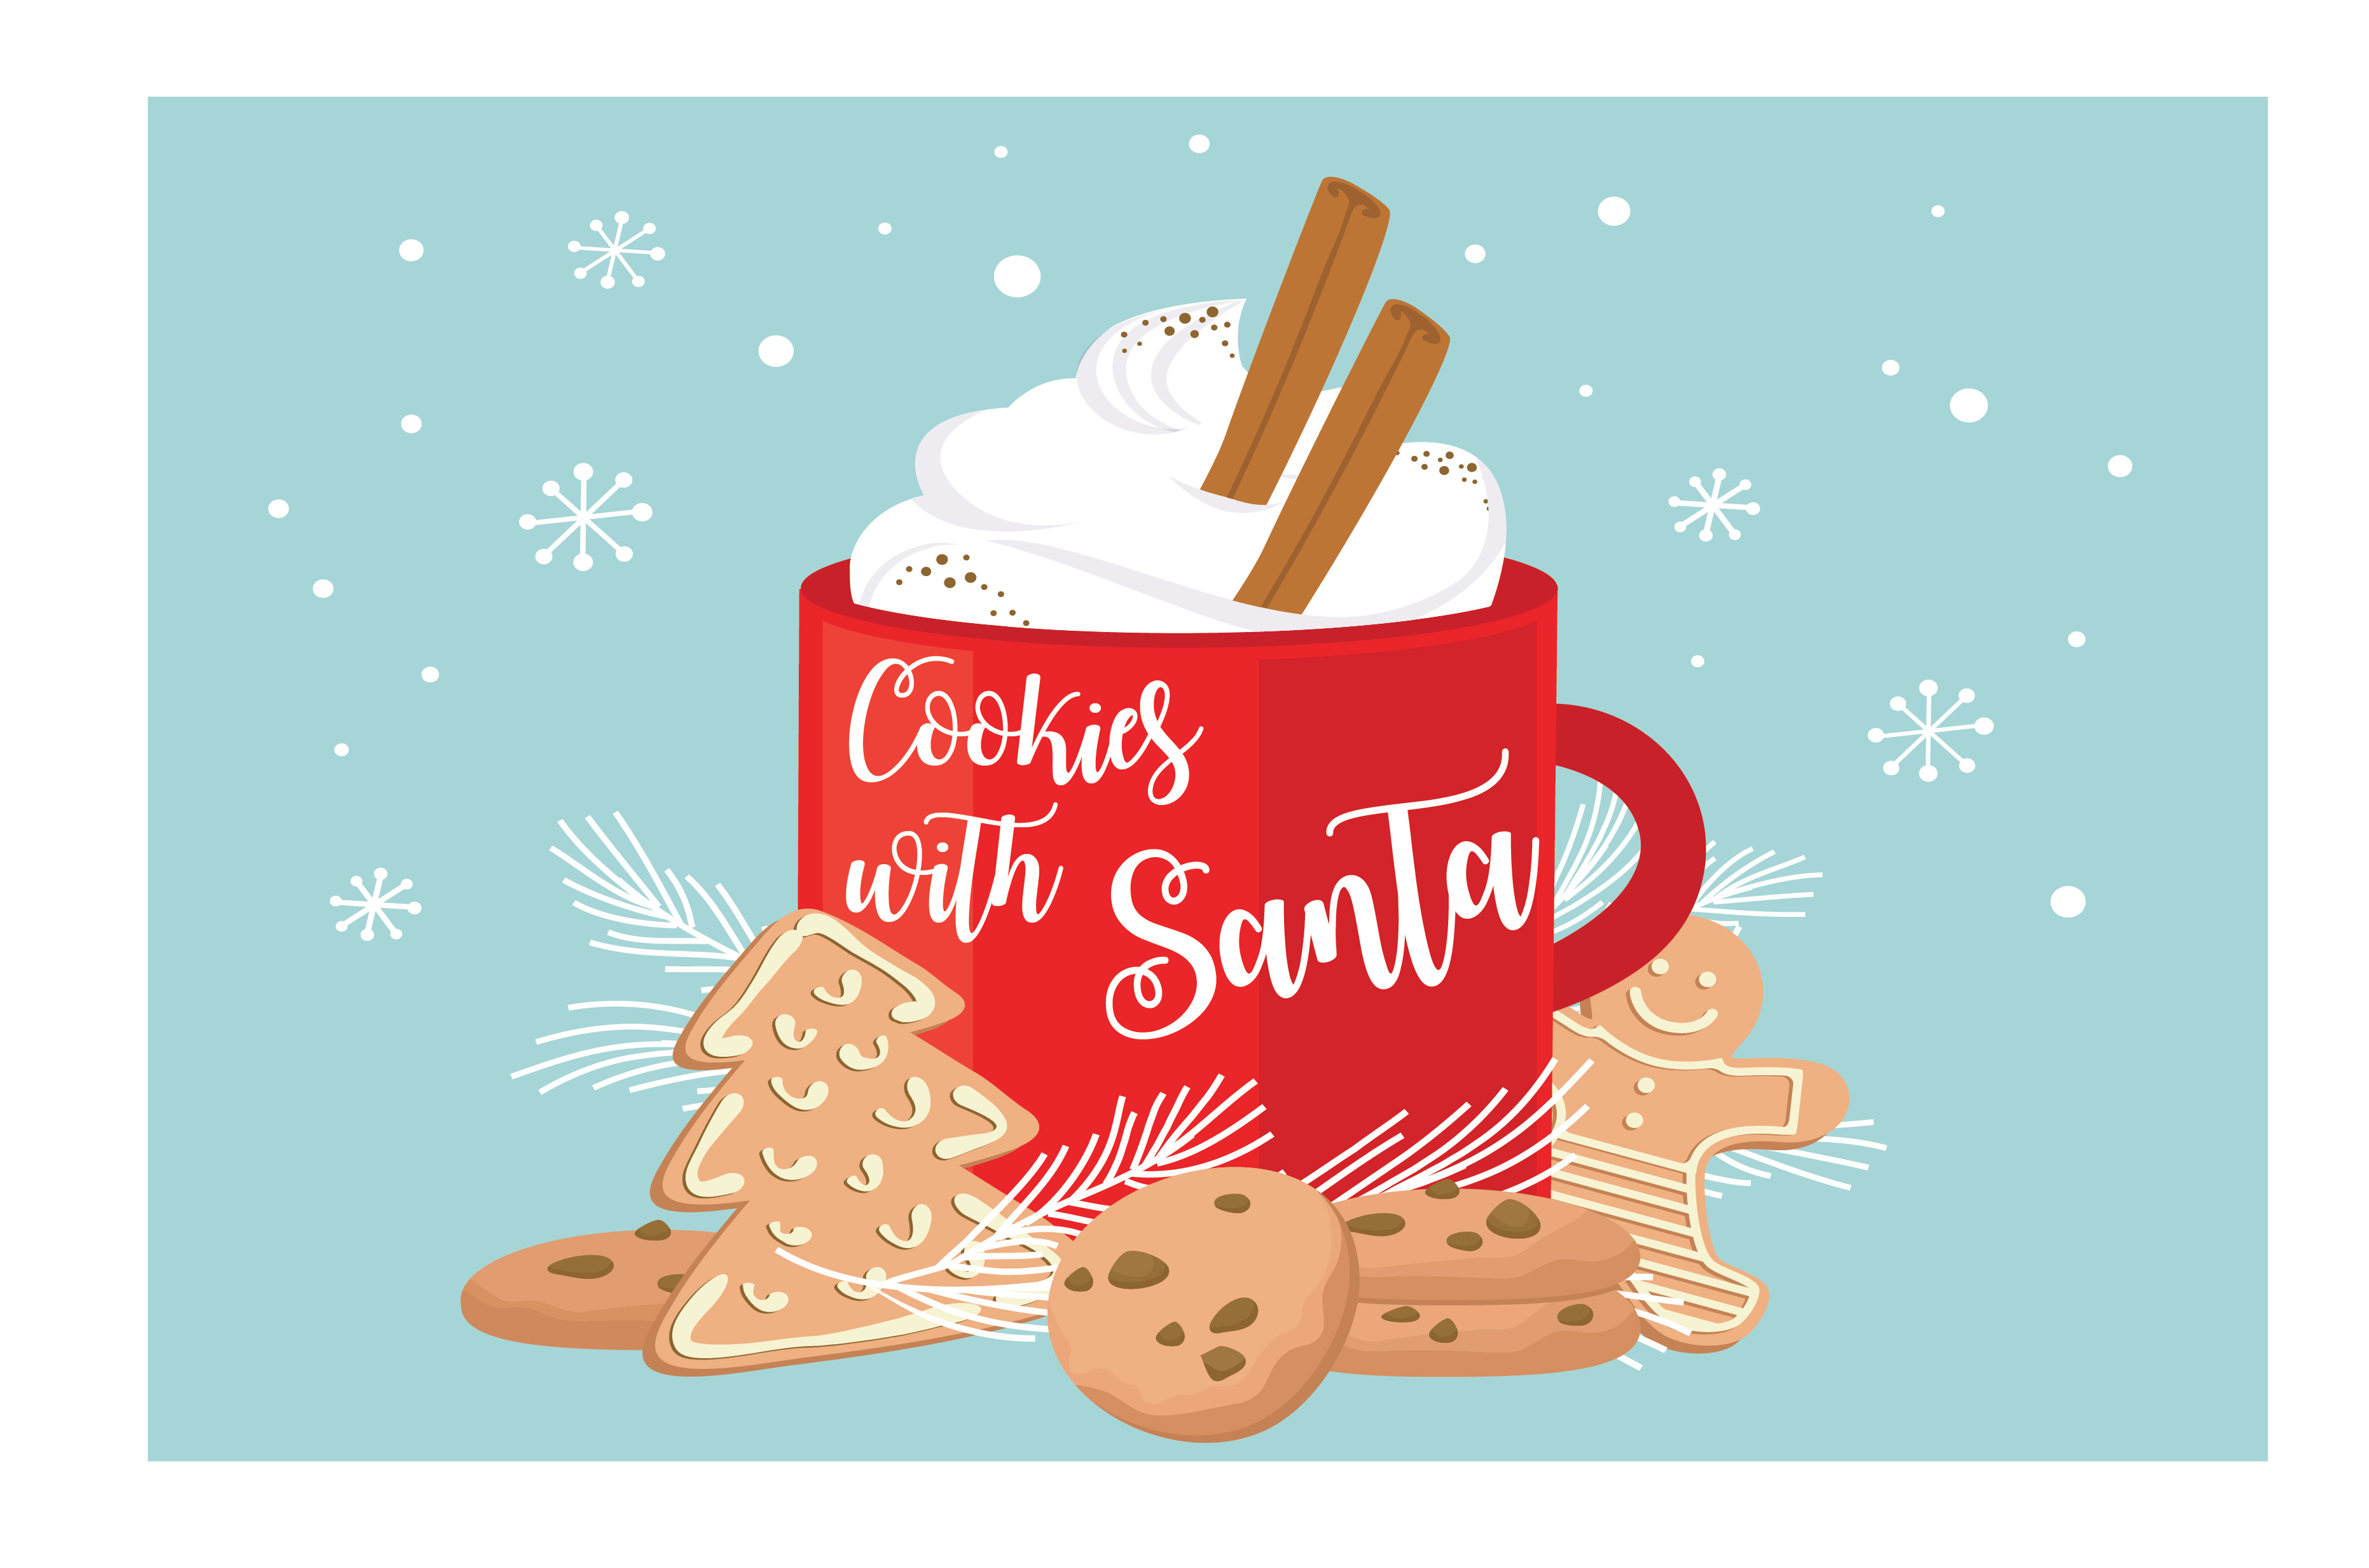 Westheimer Lakes to Host Cookies with Santa, Winter Market on December 2